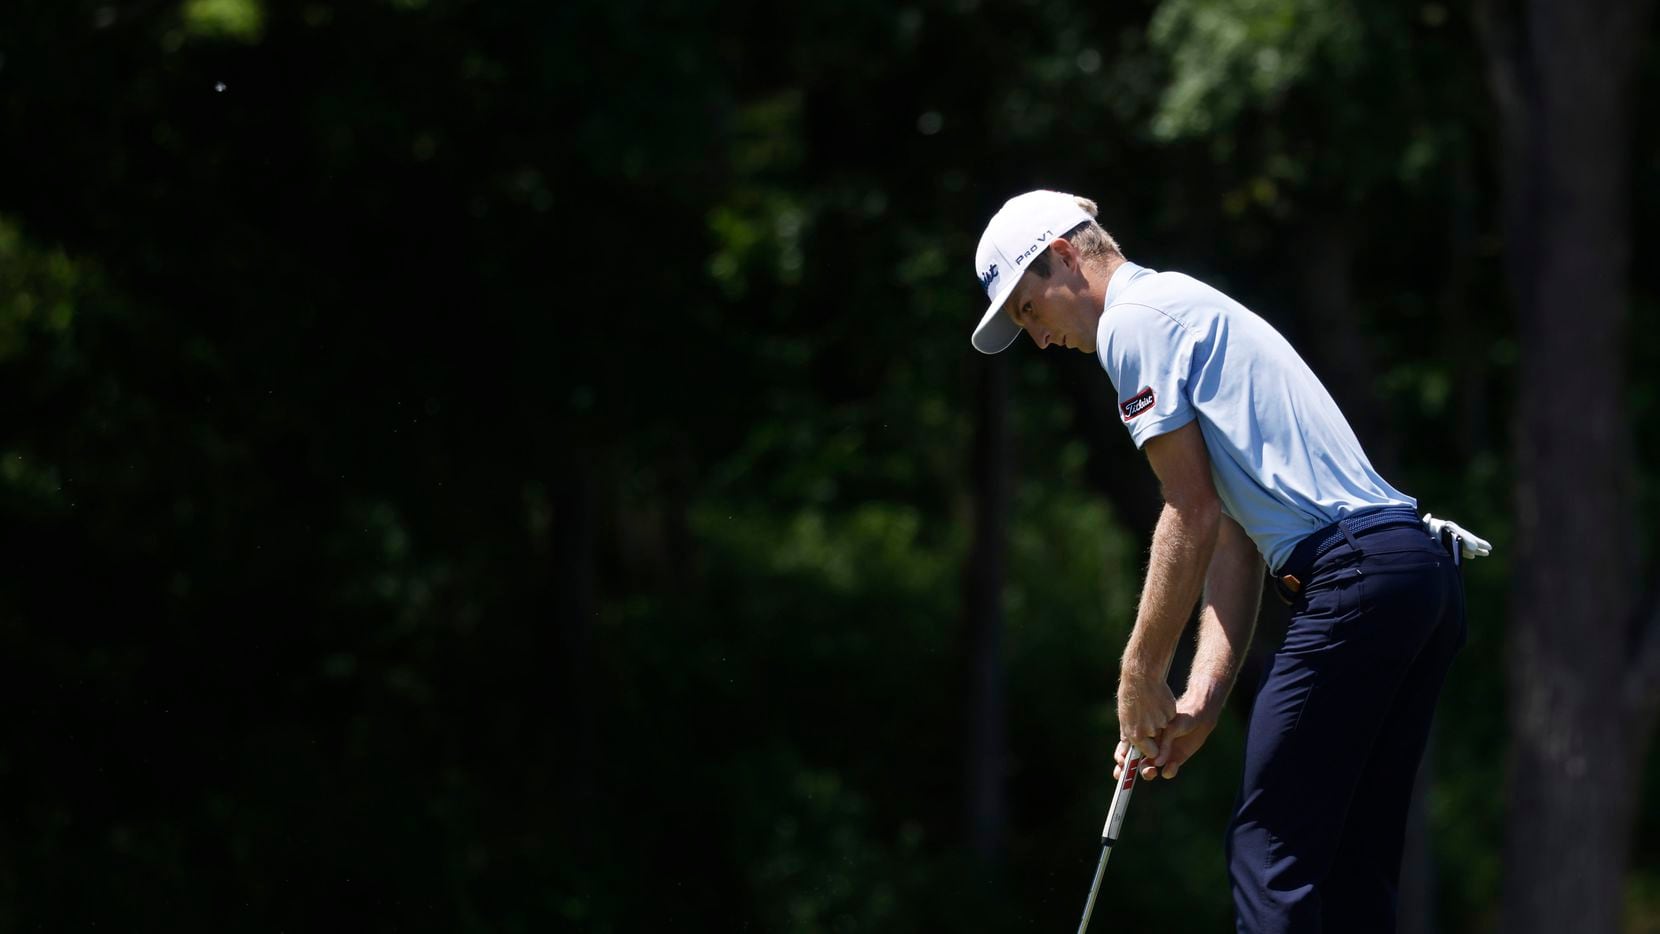 Will Zalatoris watches his putt on the 9th hole during round 1 of the AT&T Byron Nelson at...